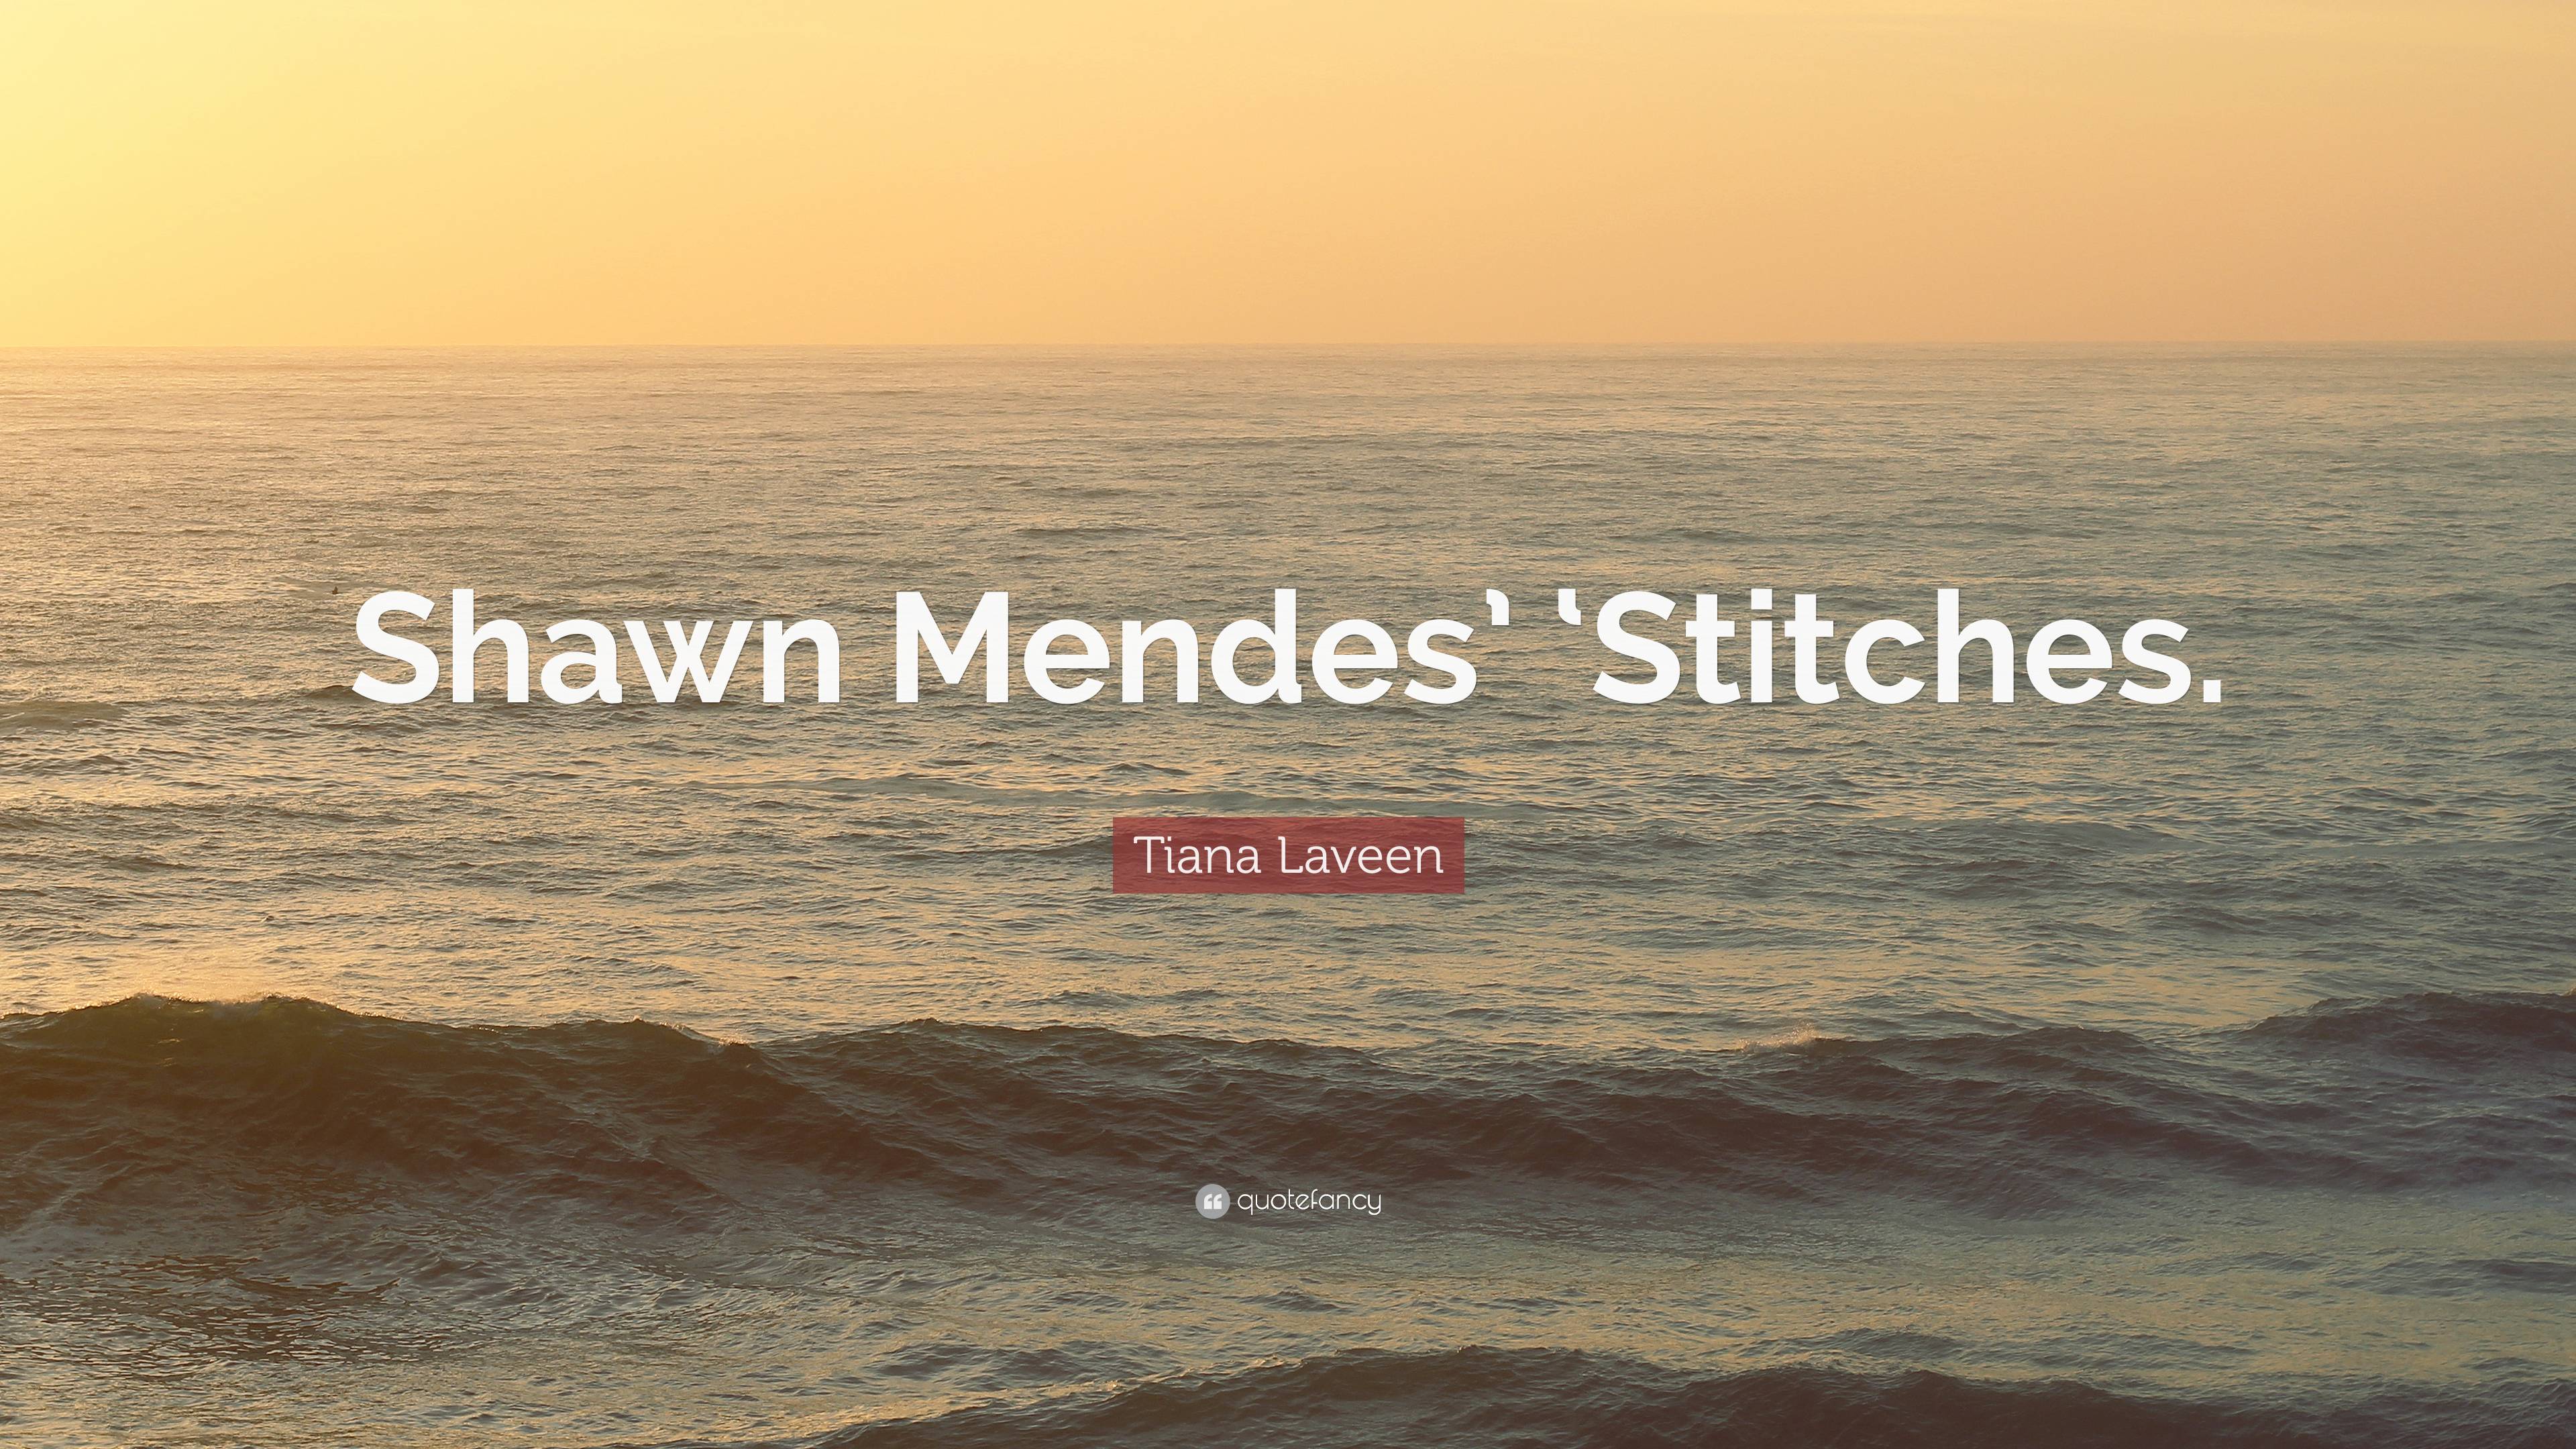 Tiana Laveen Quote: “Shawn Mendes' 'Stitches.”